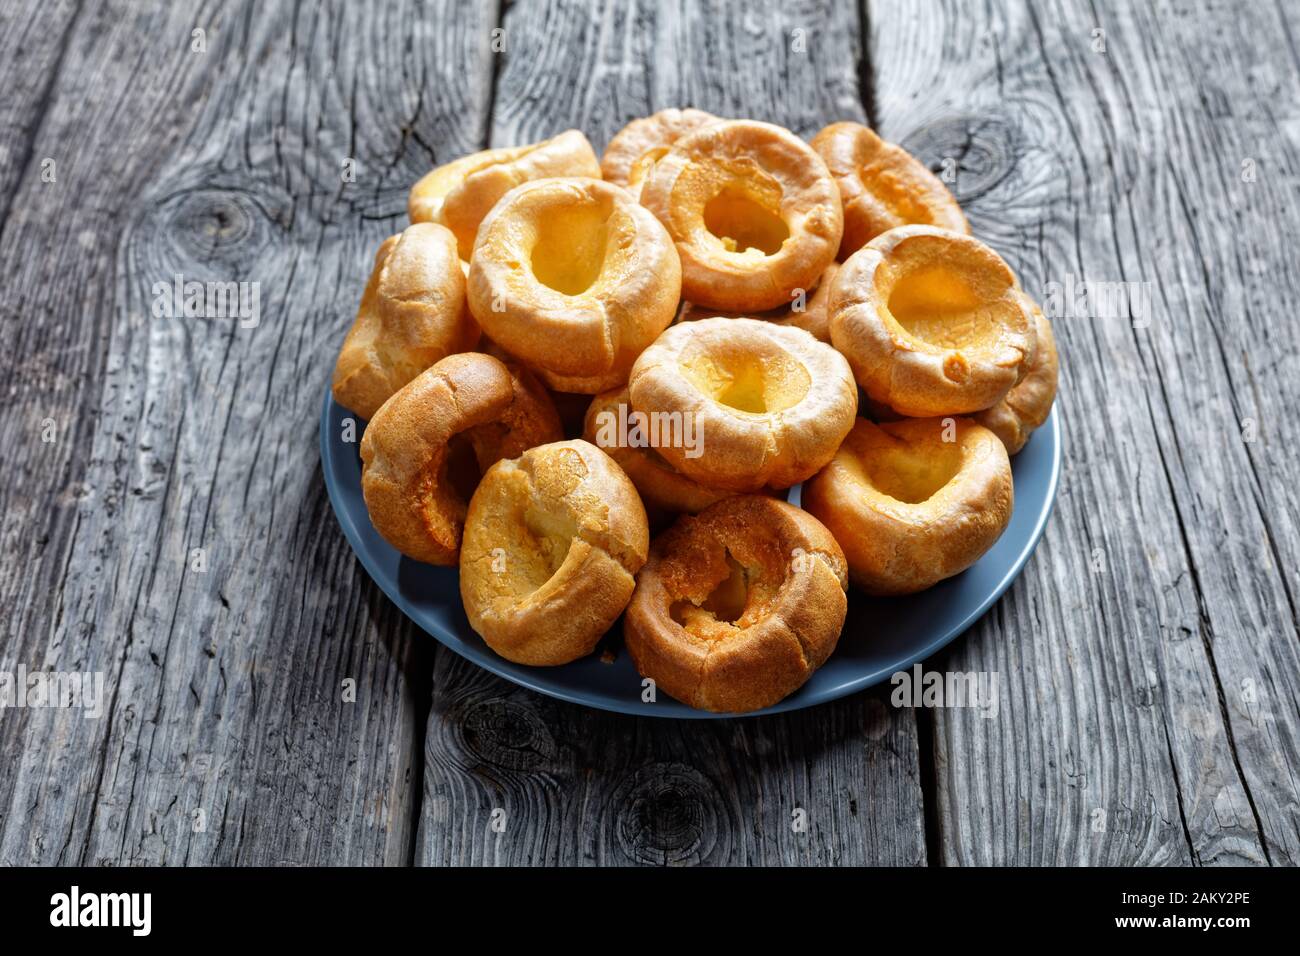 homemade Yorkshire puddings on a platter on a rustic wooden table, english cuisine, view from above Stock Photo